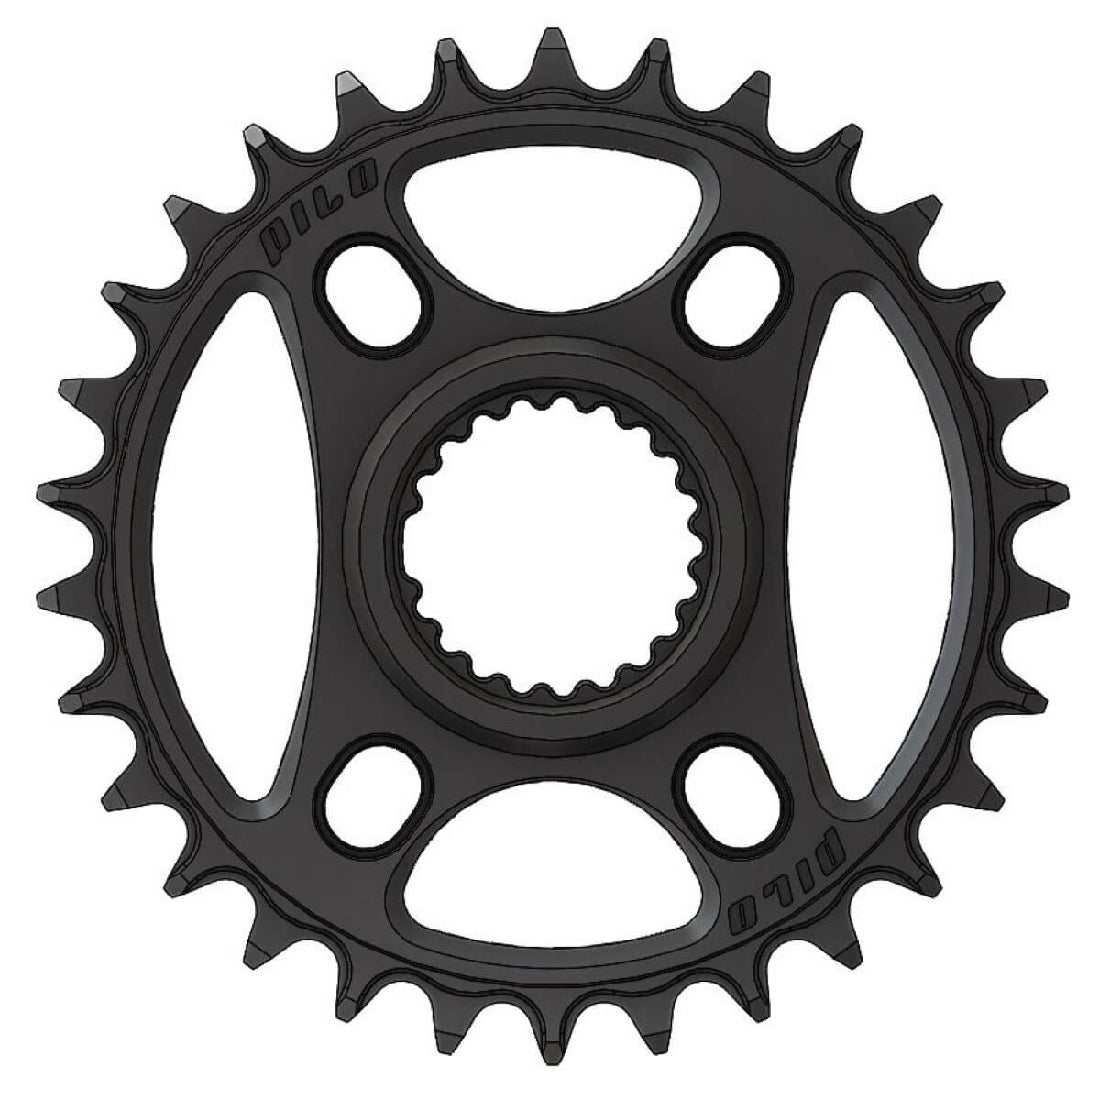 Pilo Chainring Narrow/wide 30t Shimano Style Direct Mount Hyperglide+ Compatible